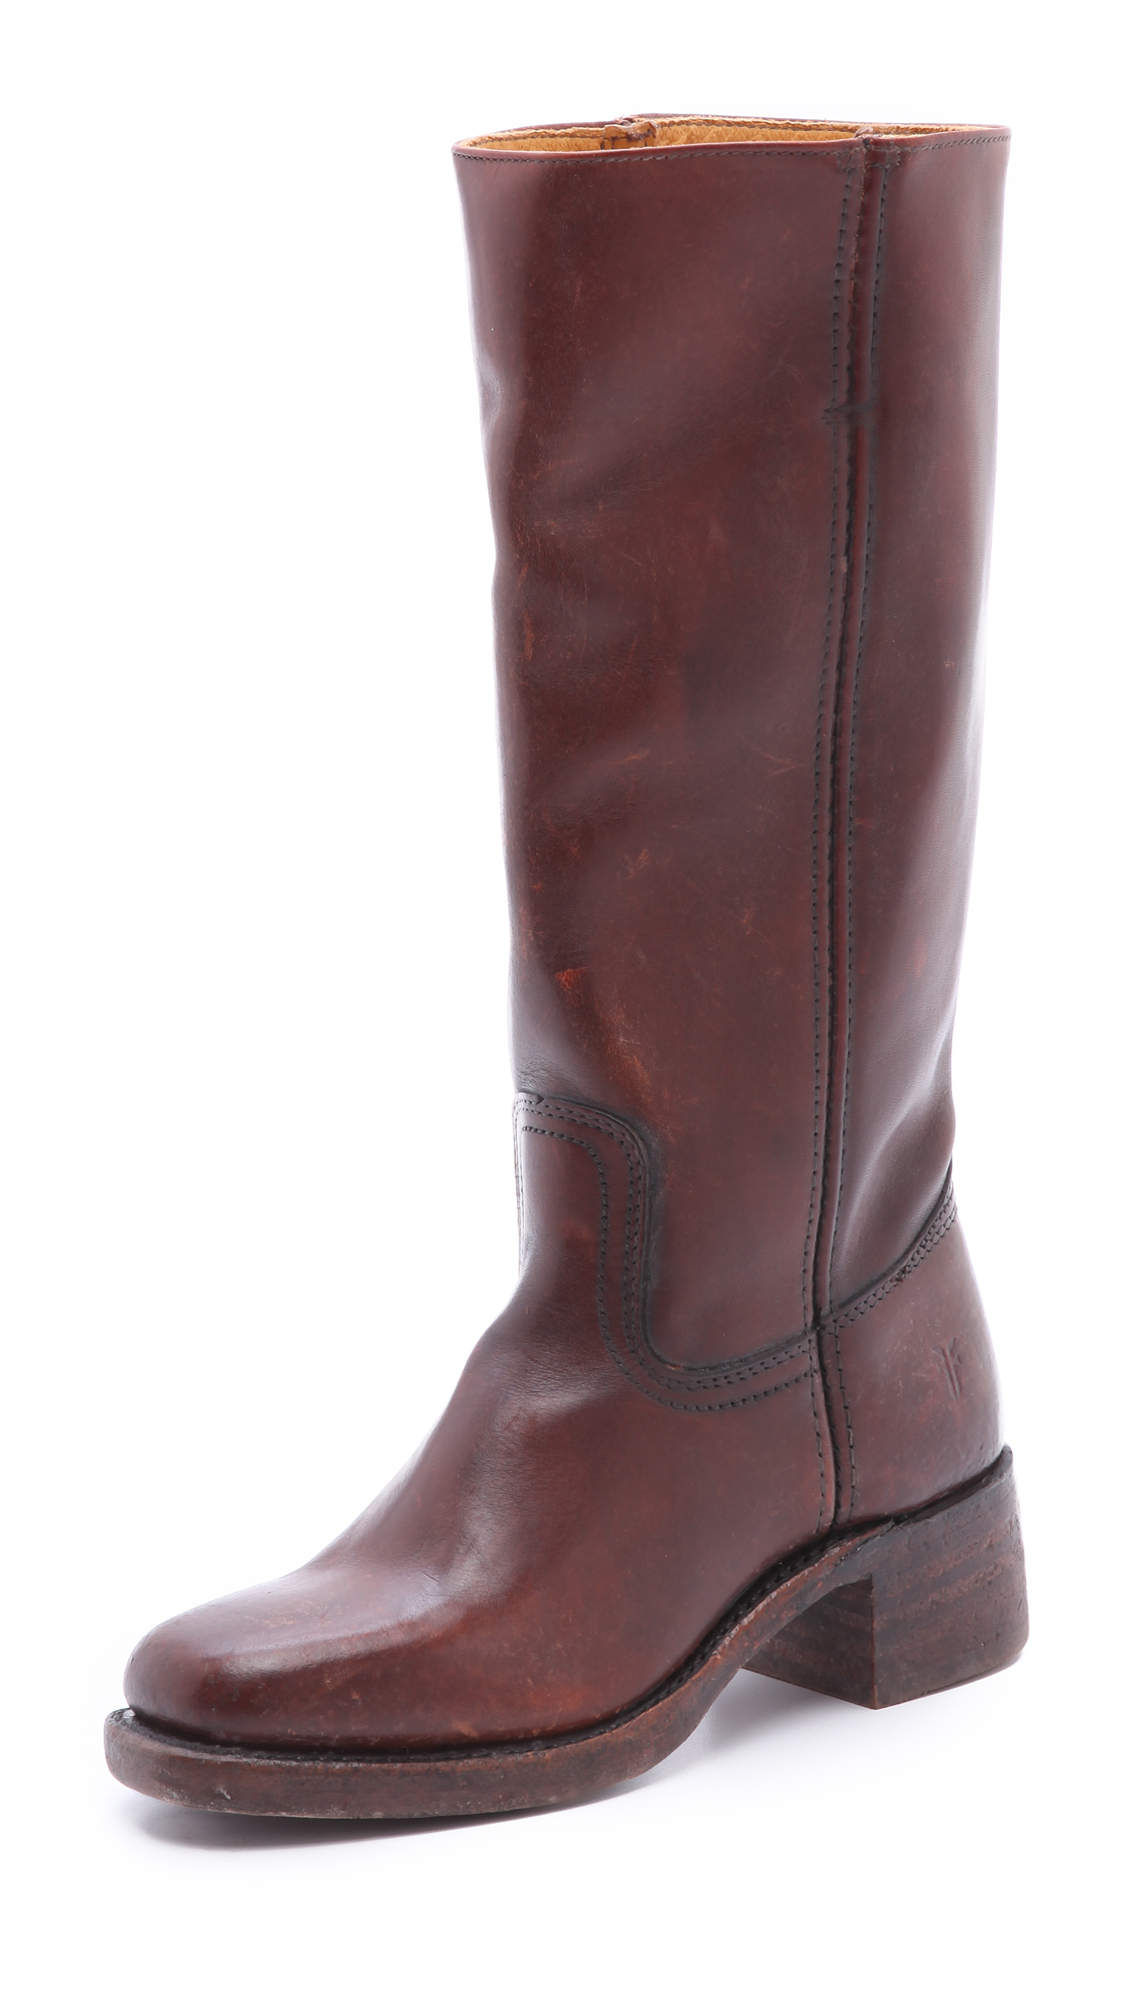 Frye 150th Anniversary Campus 14l Boots in Brown - Lyst